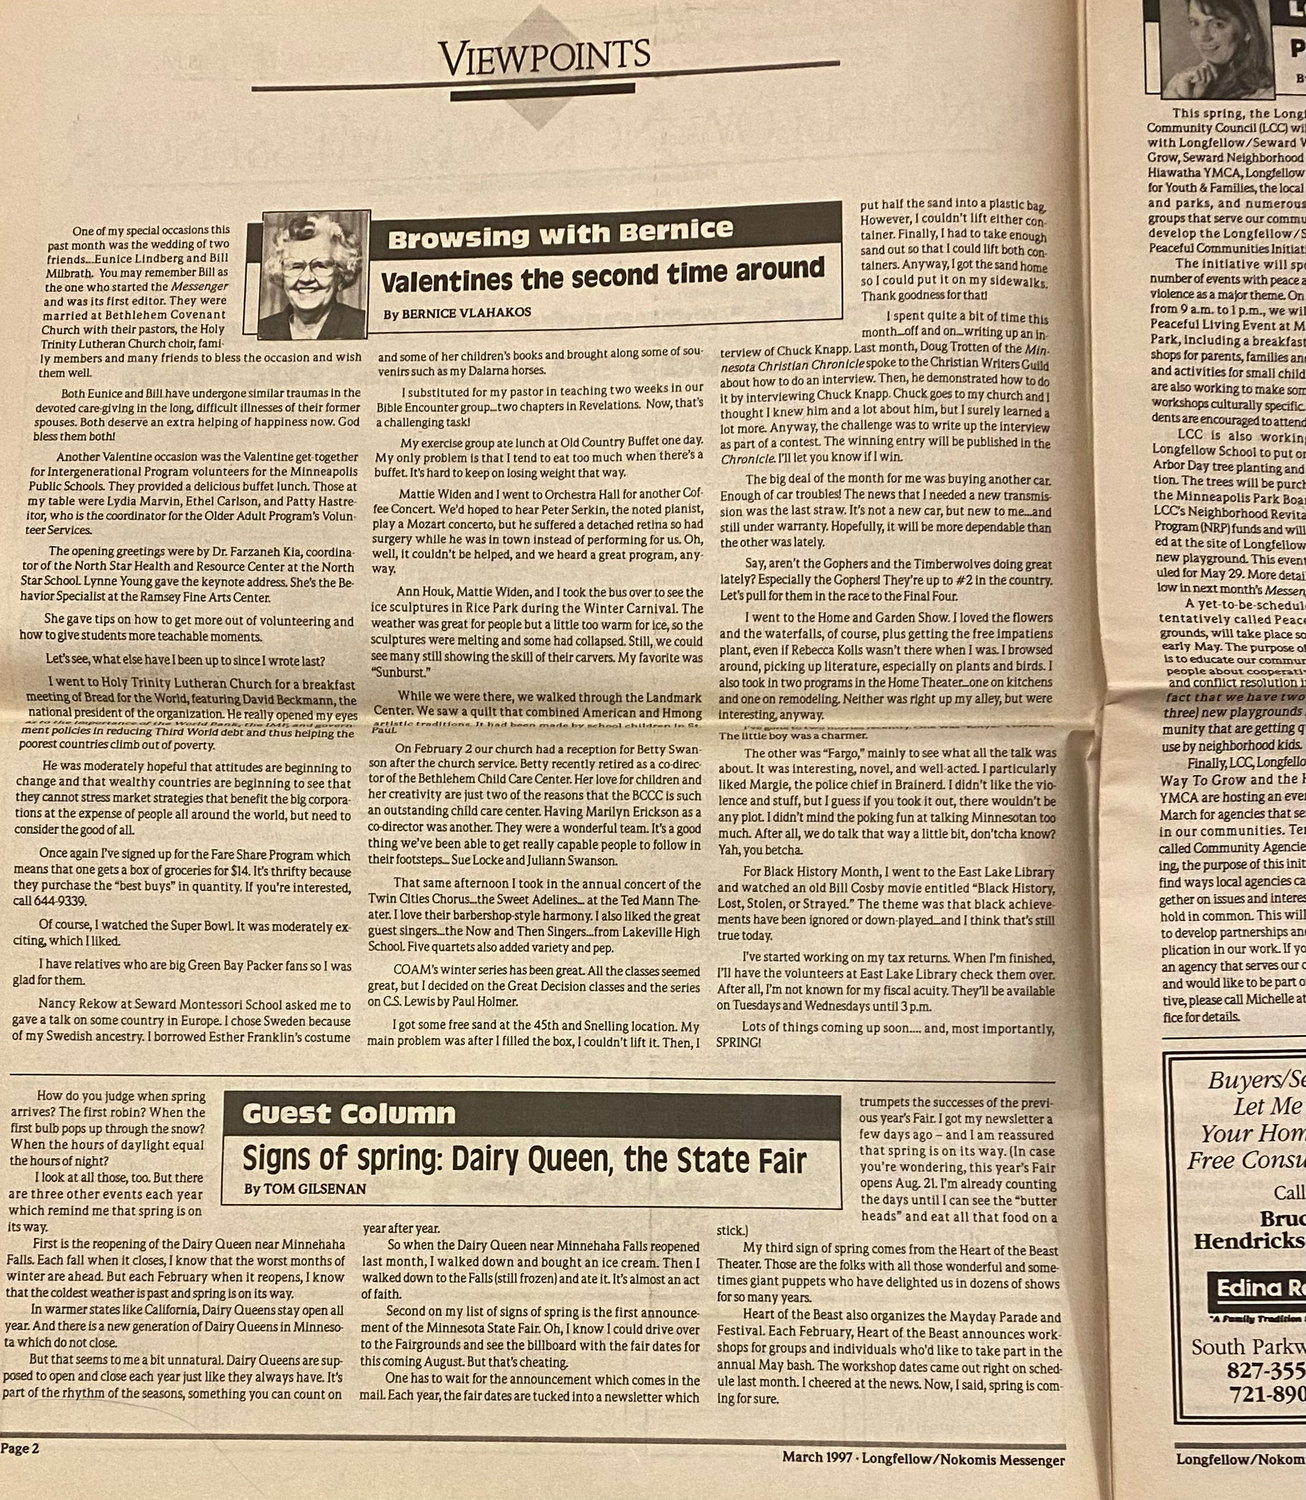 Tom Gilsenan's first column in the Messenger appeared as a guest column in March 1997.